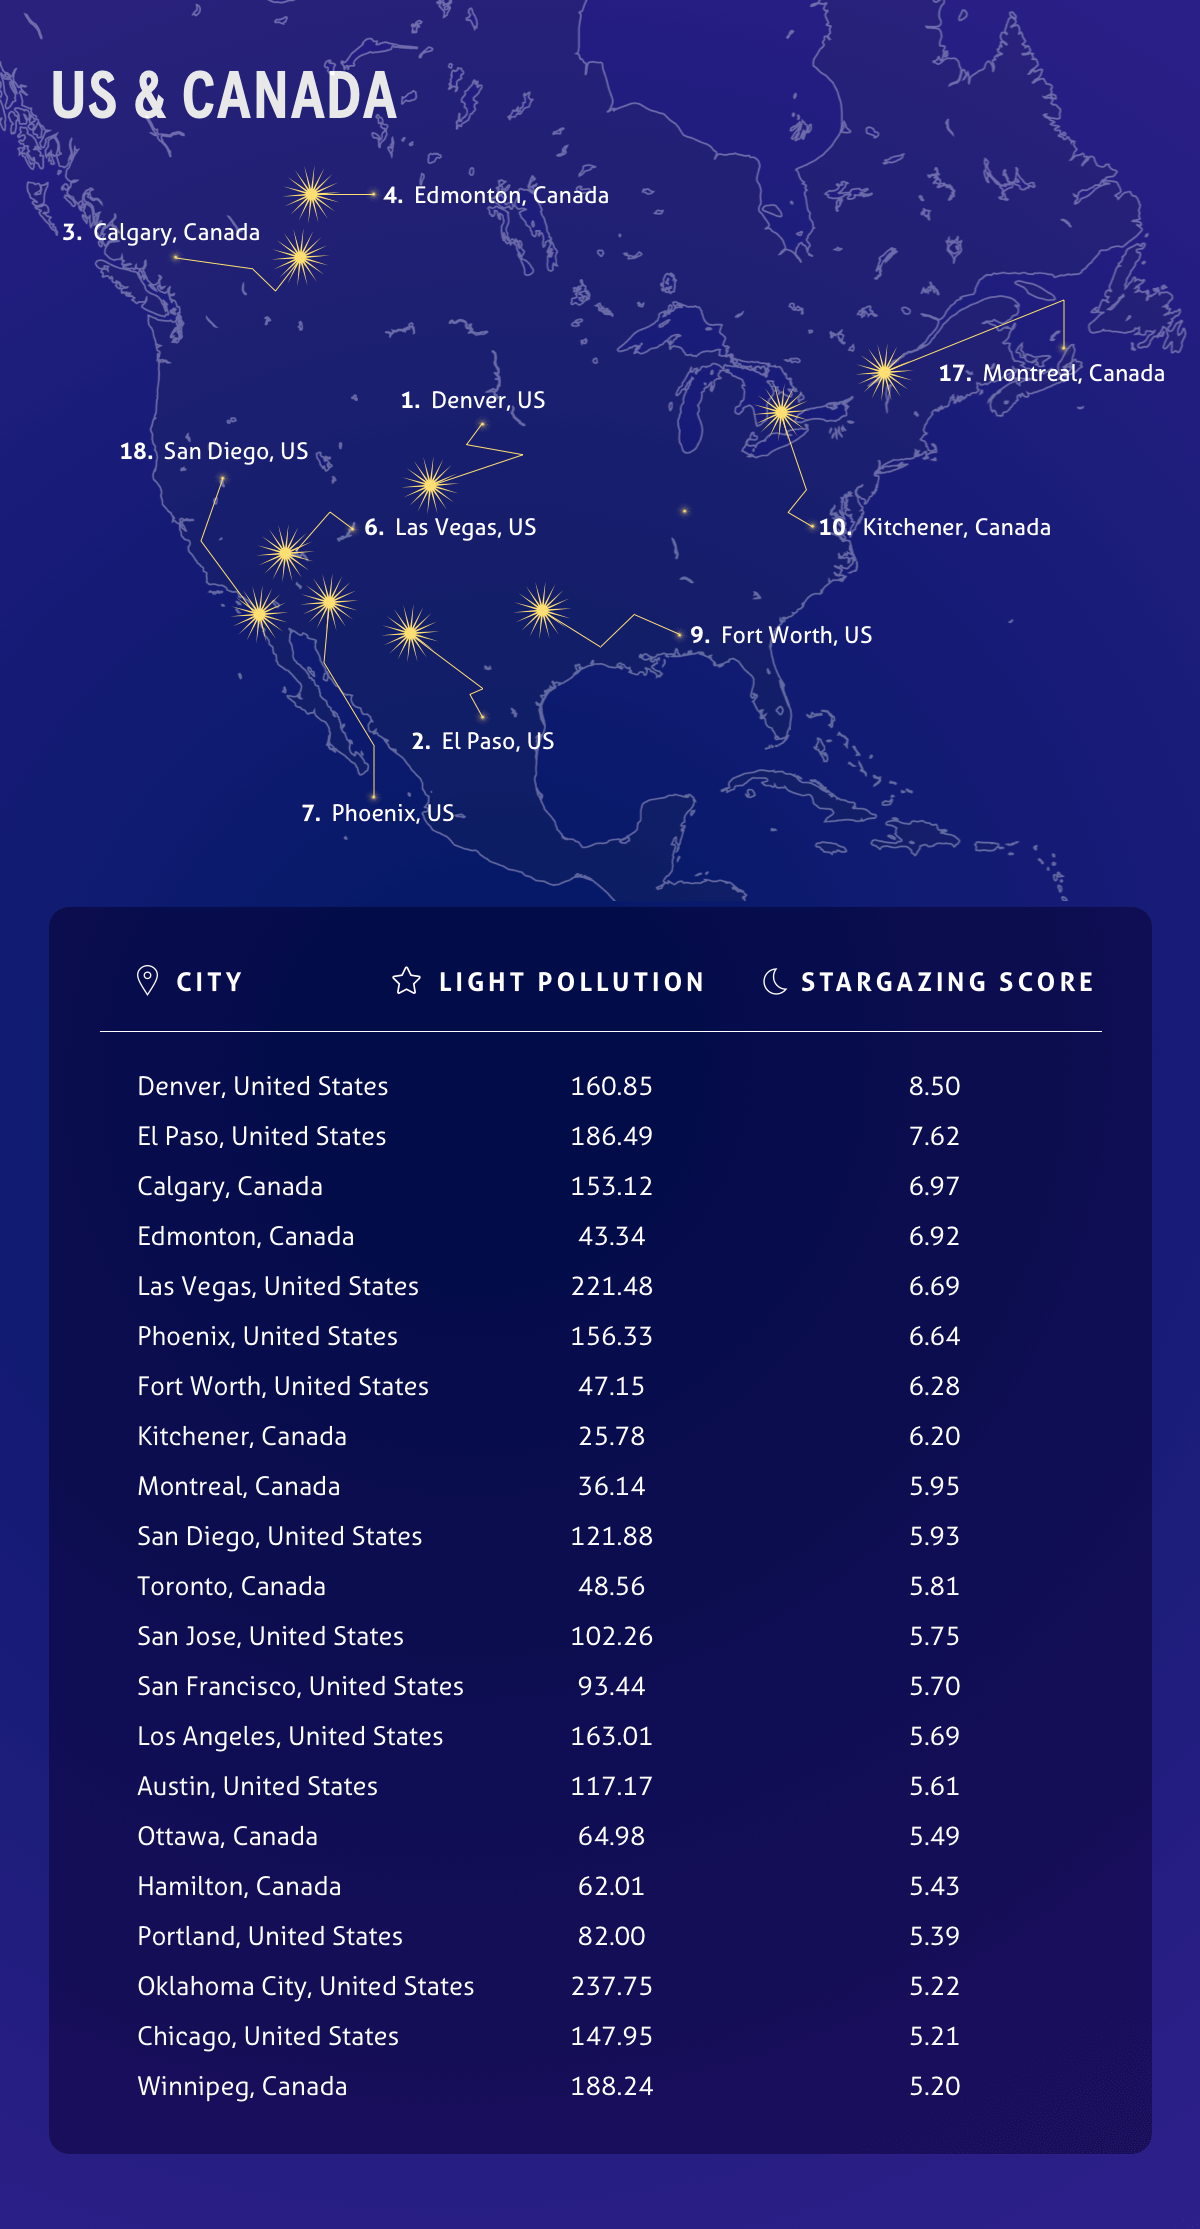 Top cities for stargazing in USA & Canada